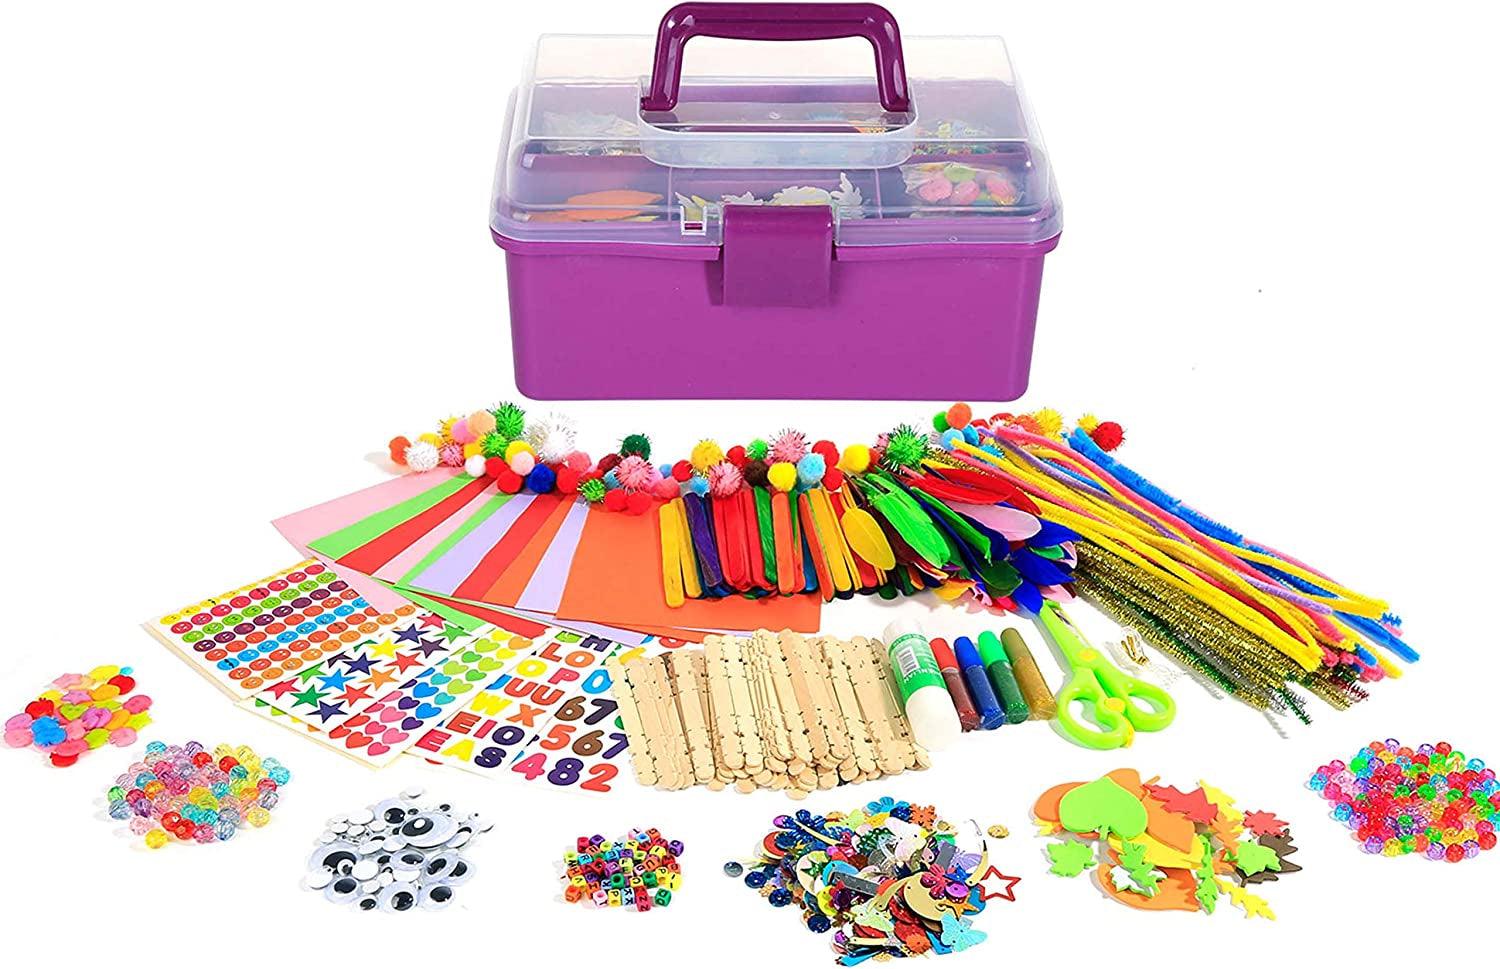 Dragon Too Mega Kids Crafts and Art Supplies Jar Kit - 1000+ Piece Set - Instructional Booklet Included - Glitter Glue, Construction Paper, Colored